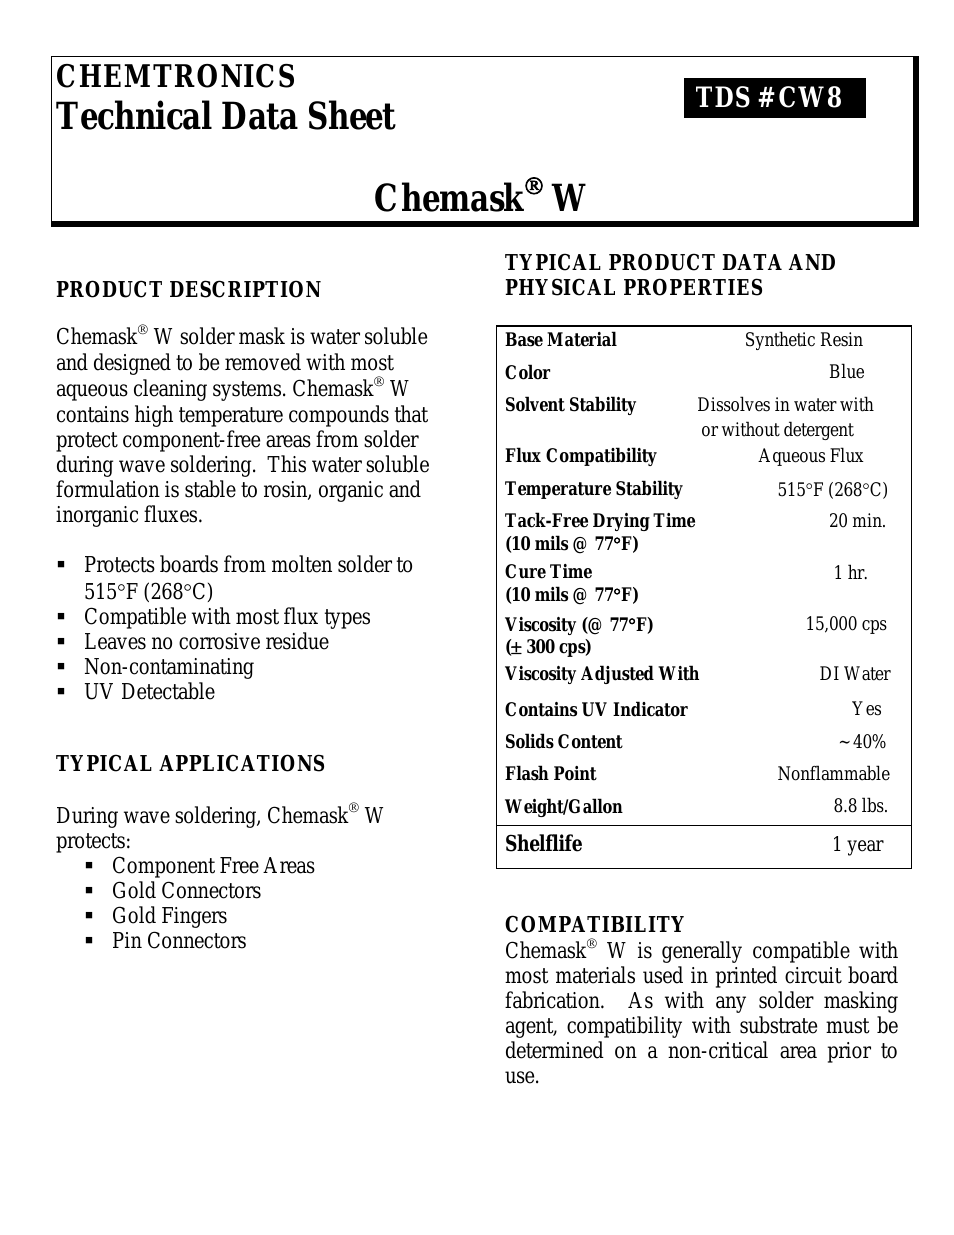 Chemask® W - Water Soluble CW8